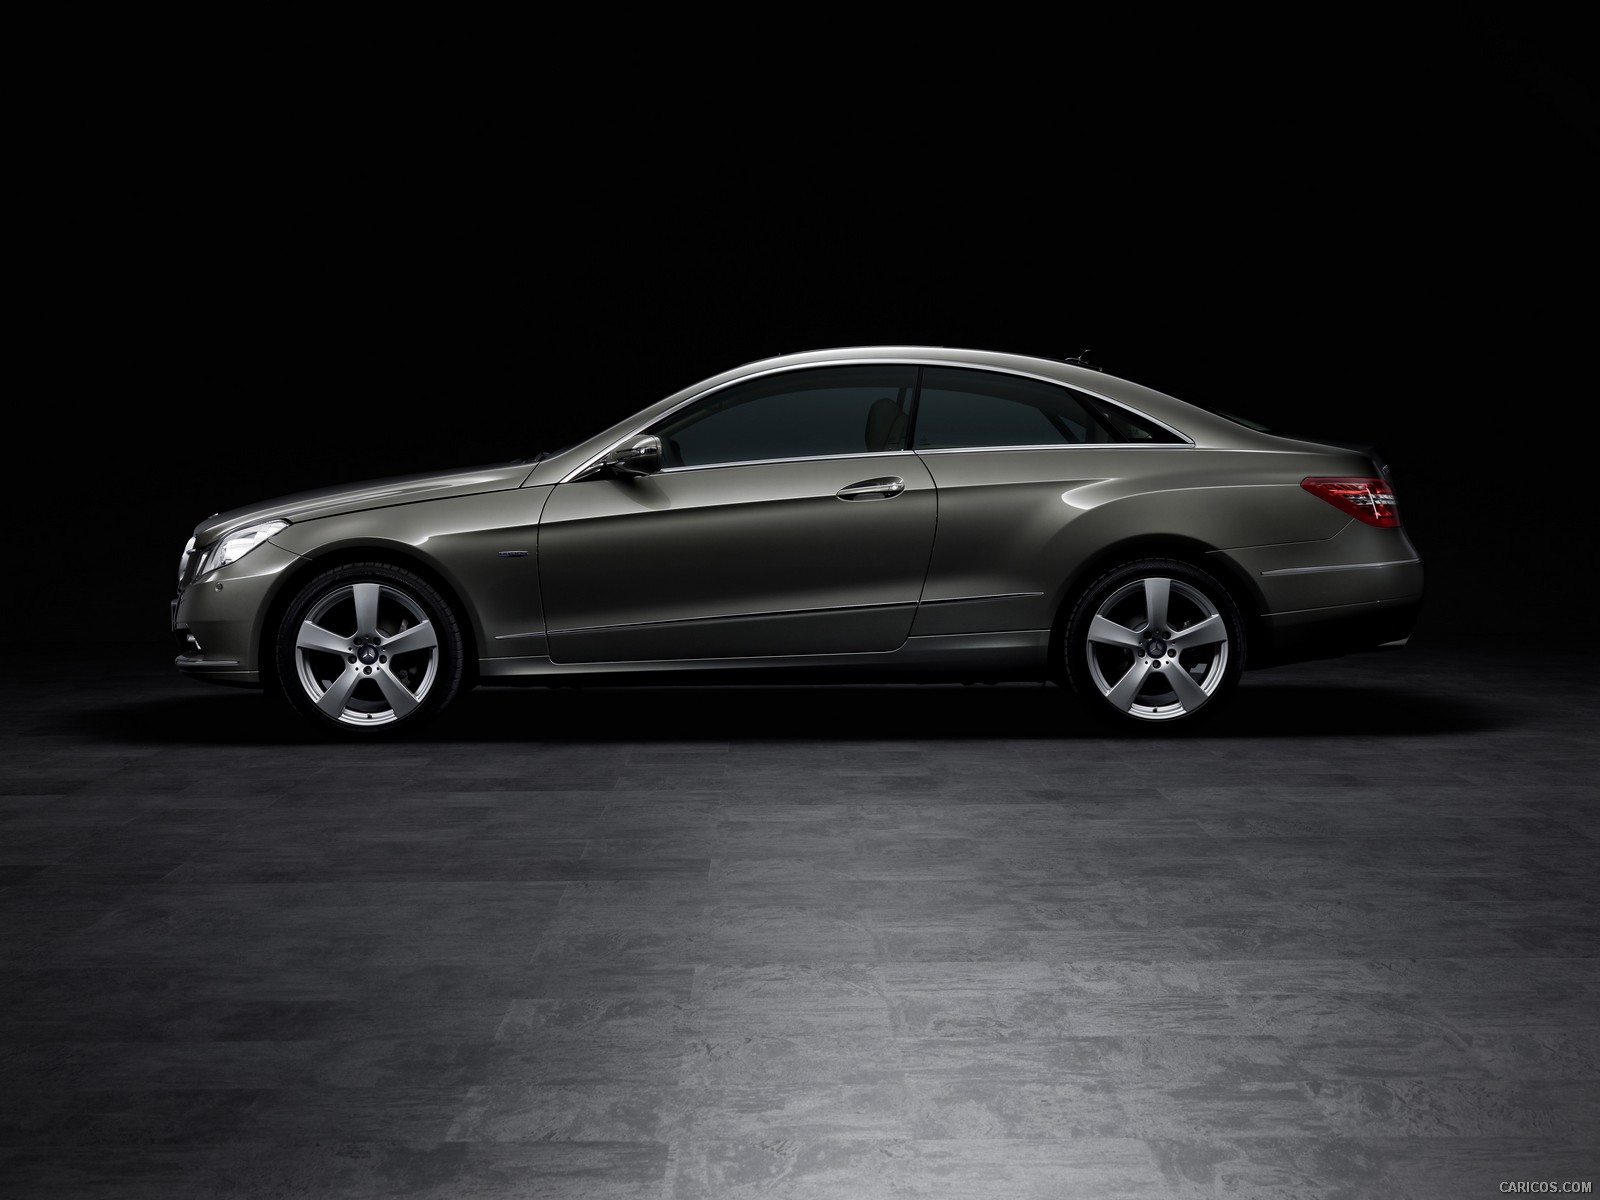 2010 Mercedes-Benz E-Class Coupe  - Side View Photo, #158 of 213